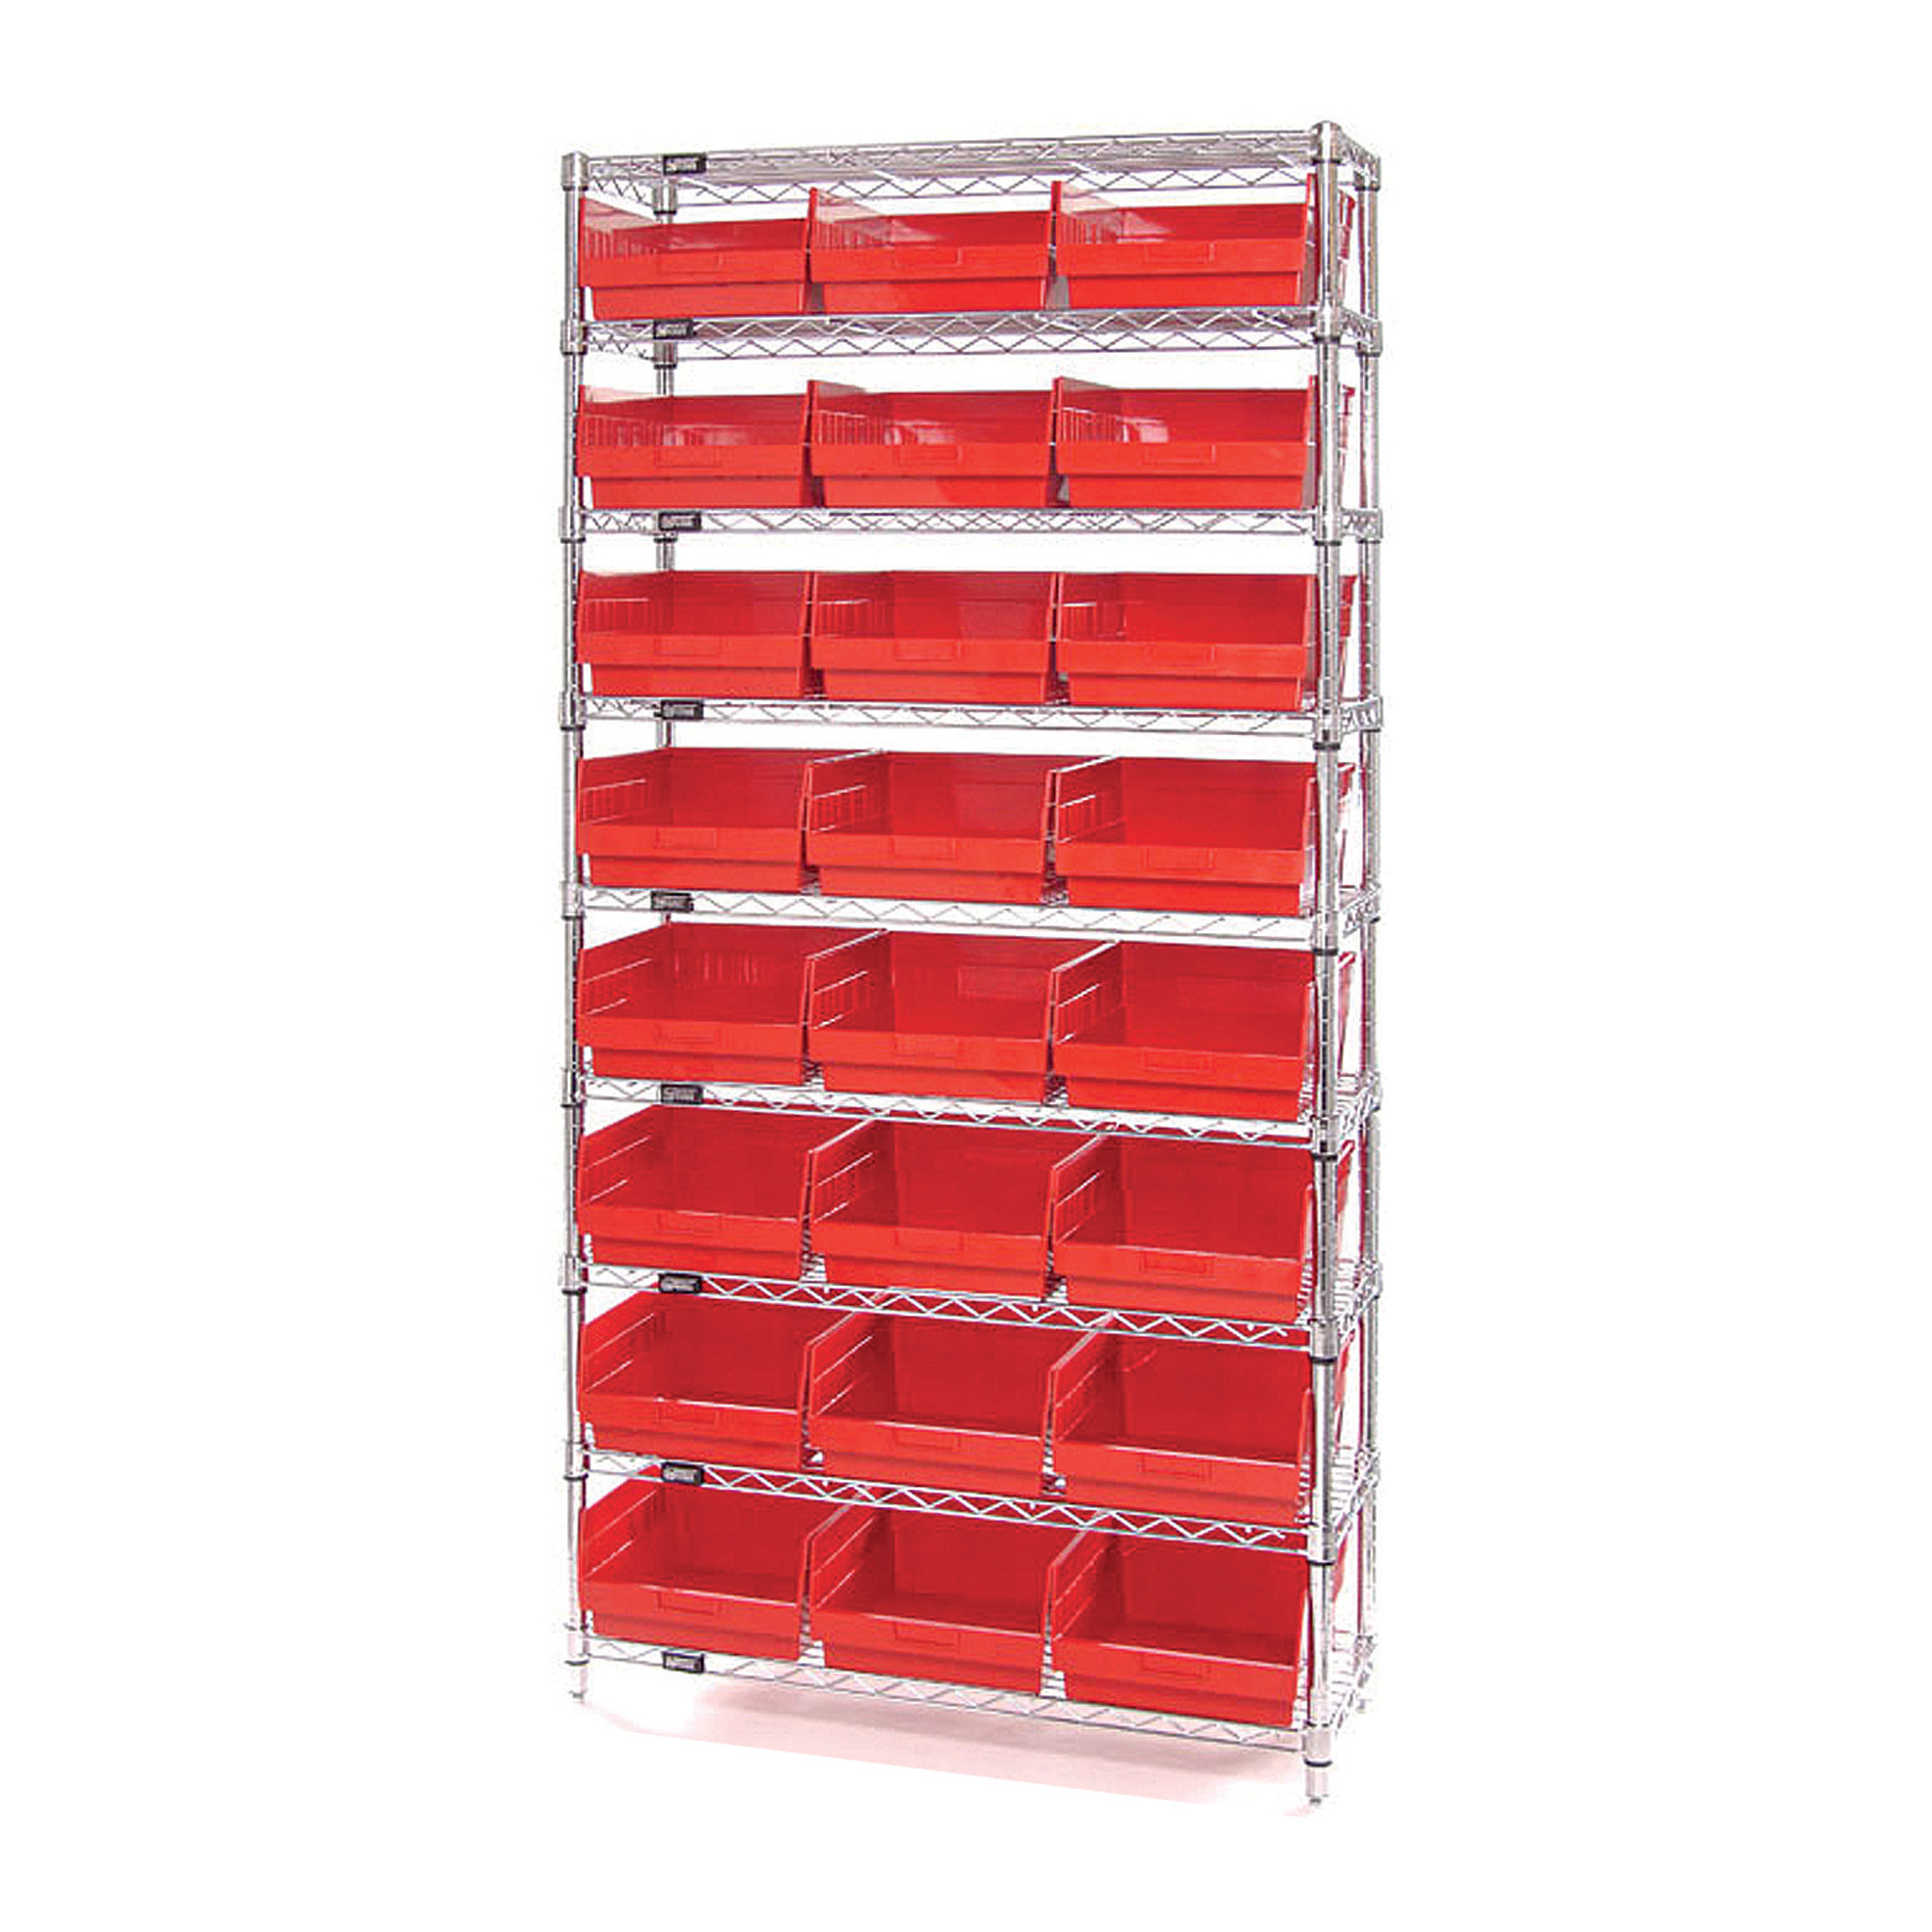 Storage Single Side Wire Chrome Shelving Unit with 24 Bins — 36Inch W x 12Inch D x 74Inch H, Red, Model - Quantum WR9-209RD